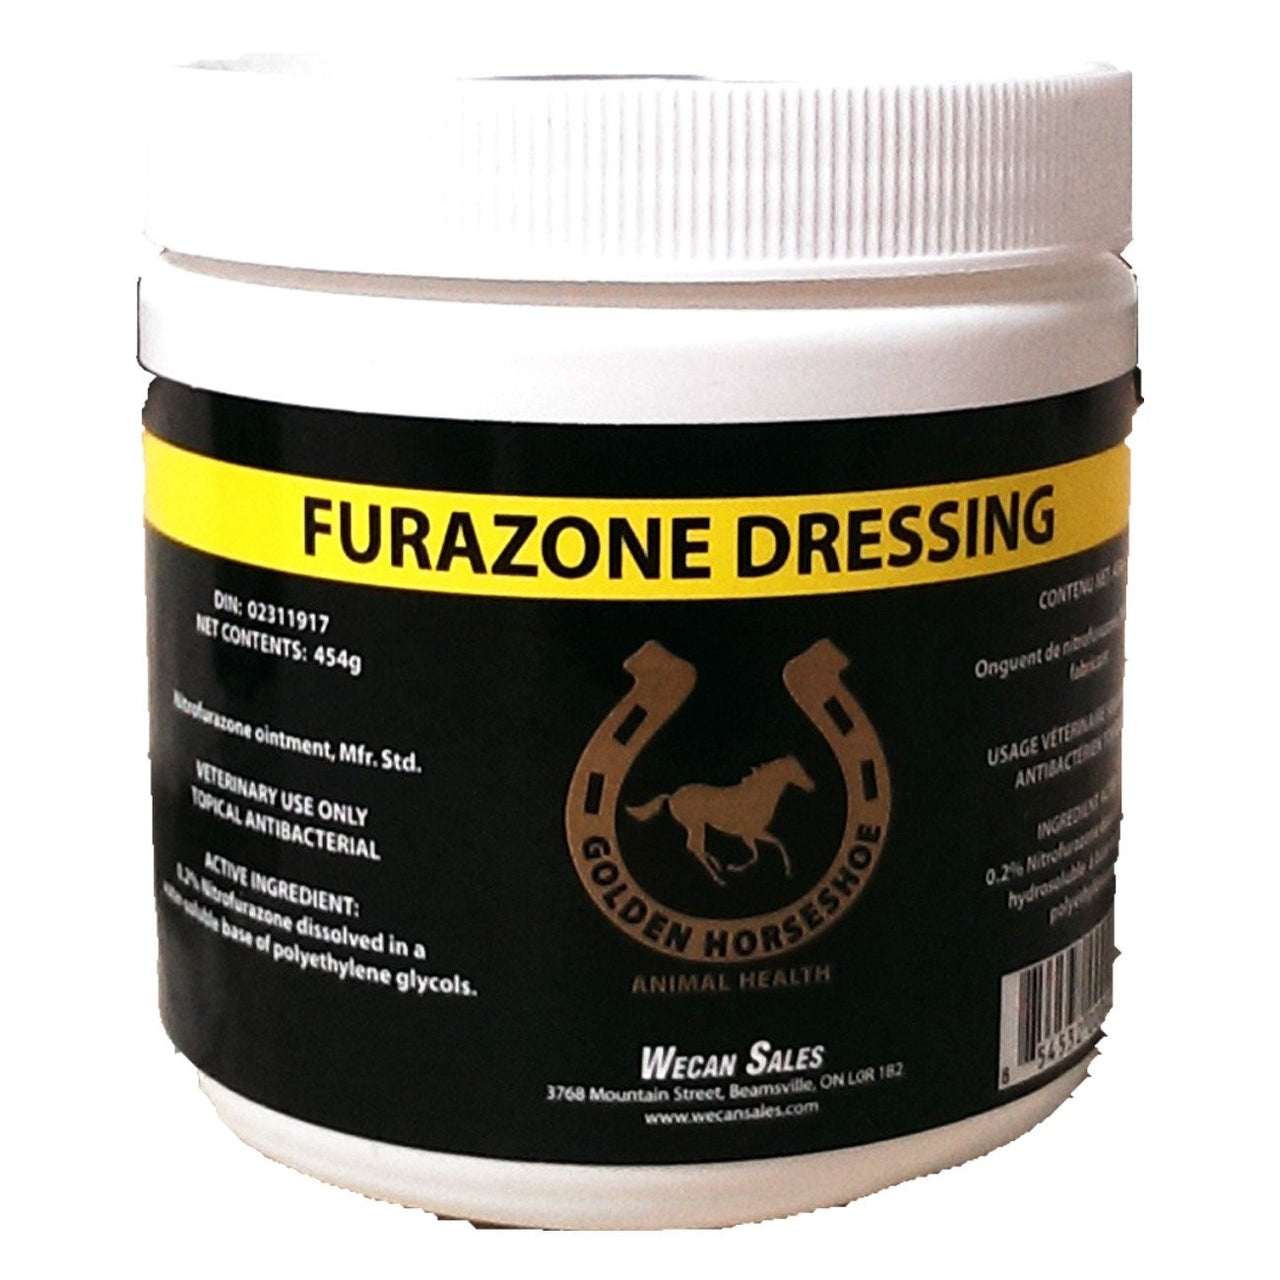 Ghs Furazone Dressing Ointment 0.2% Nitrofurazone (2 Sizes) - 454G - Pharmaceuticals Ghs - Canada